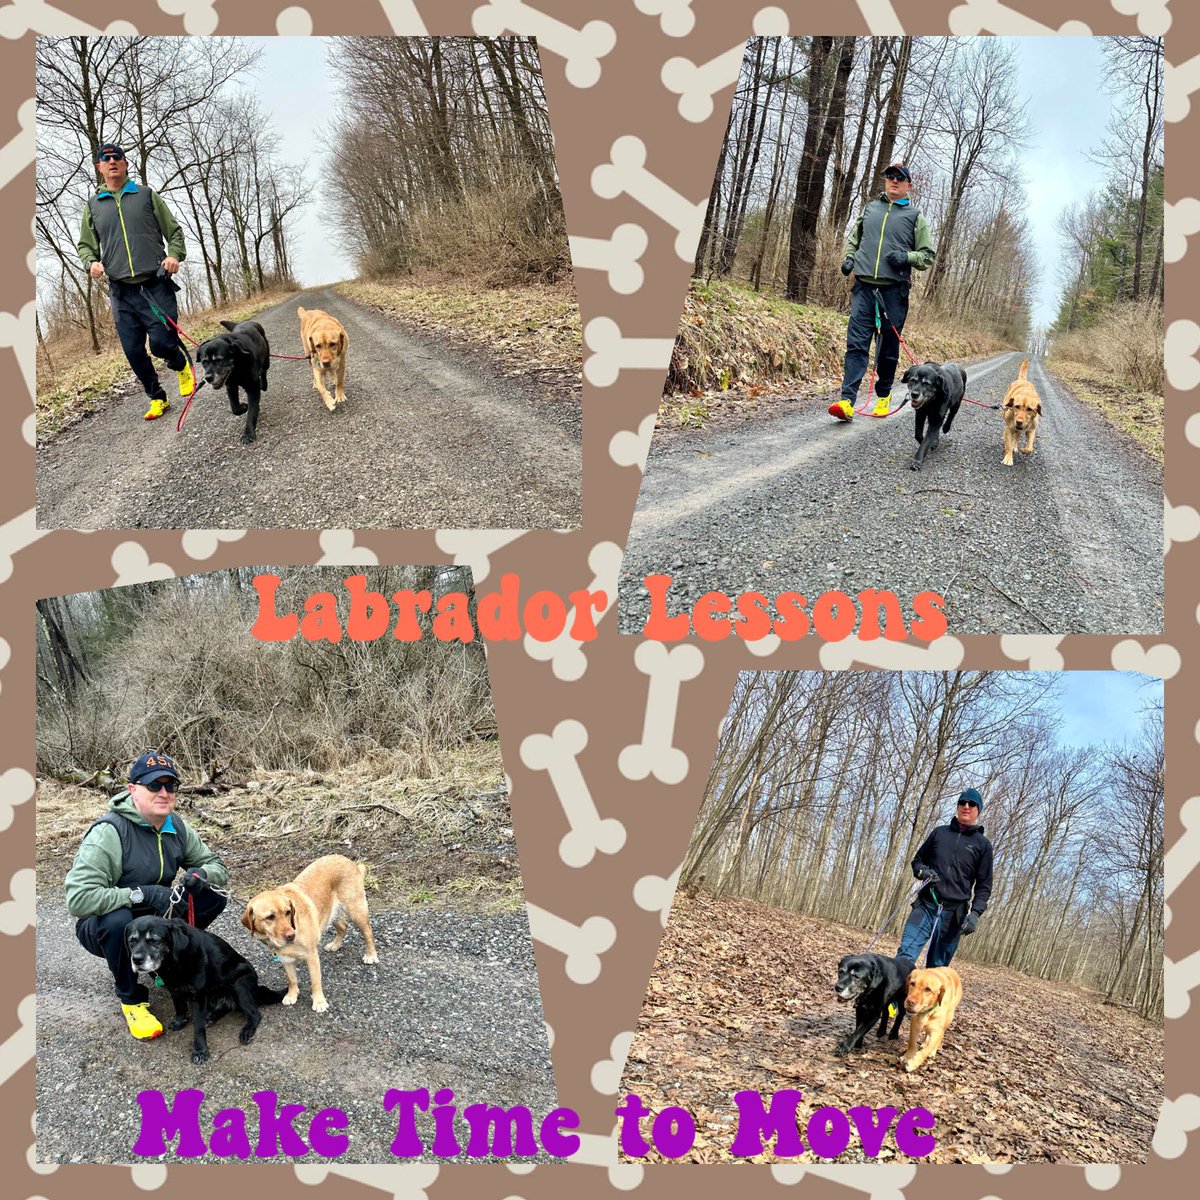 #LabradorLesson from #FitLabPGH (link below): Don’t let “life” get in the way of movement. When life gets busy, make time to move!

#WiseWords #SmartDogs #Labs #MoveMore #MakeTimeForYou 

tinyurl.com/FLP-BusyLabs